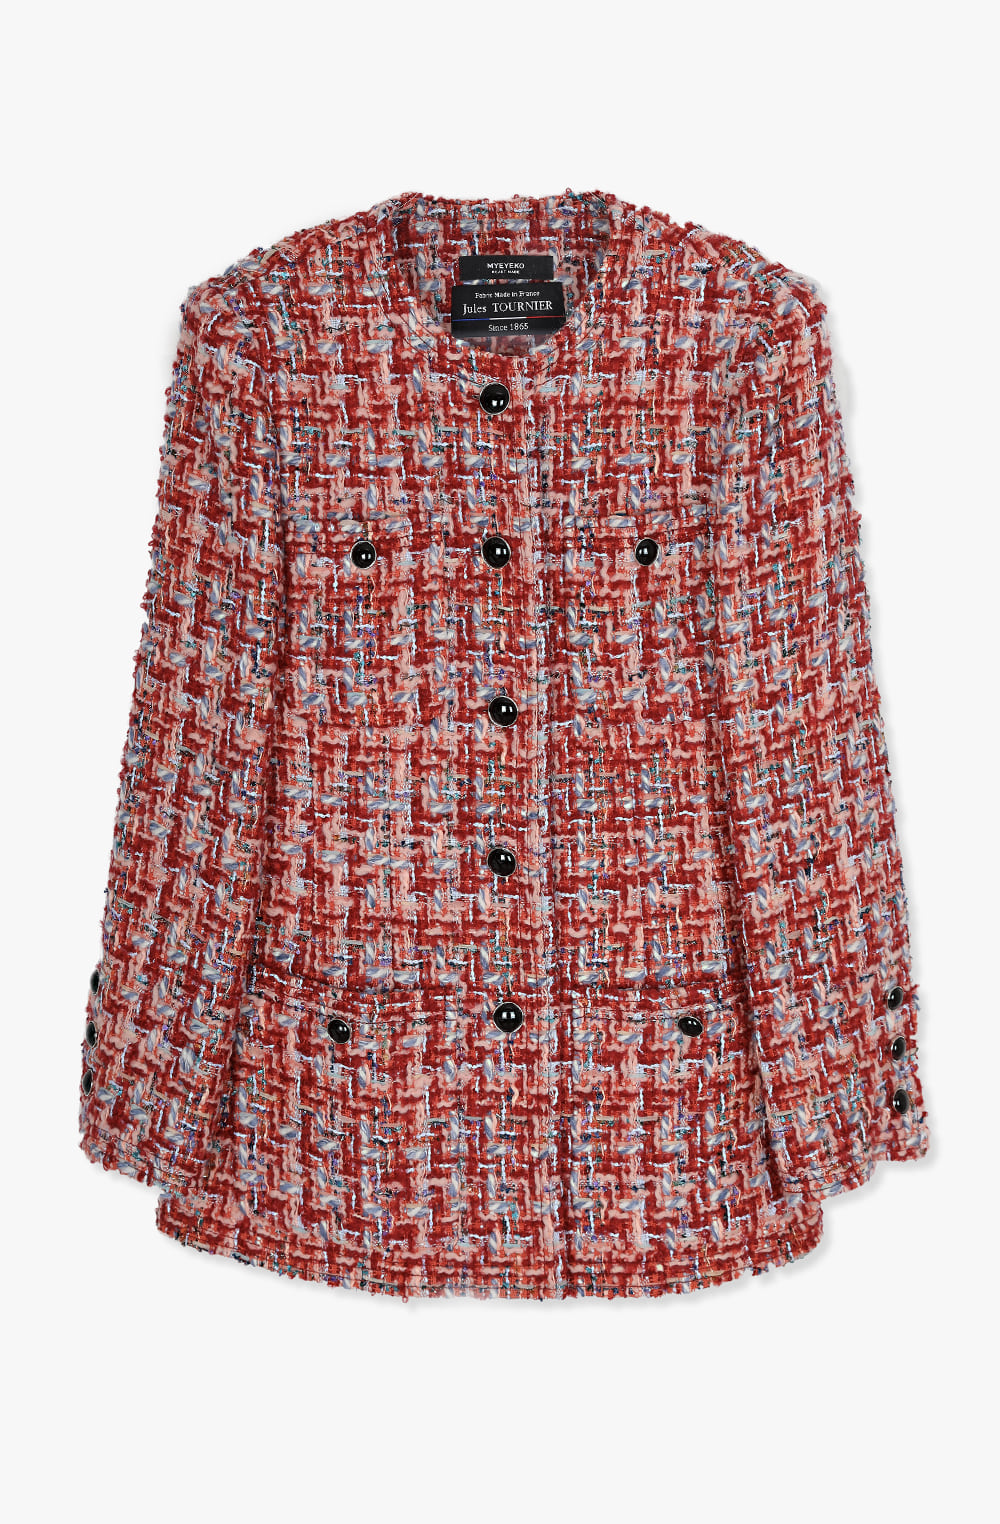 HIGH QUALITY LINE - CLASSIC TWEED JACKET &quot;Jules TOURNIER&quot; (Fabric By. Made in France)